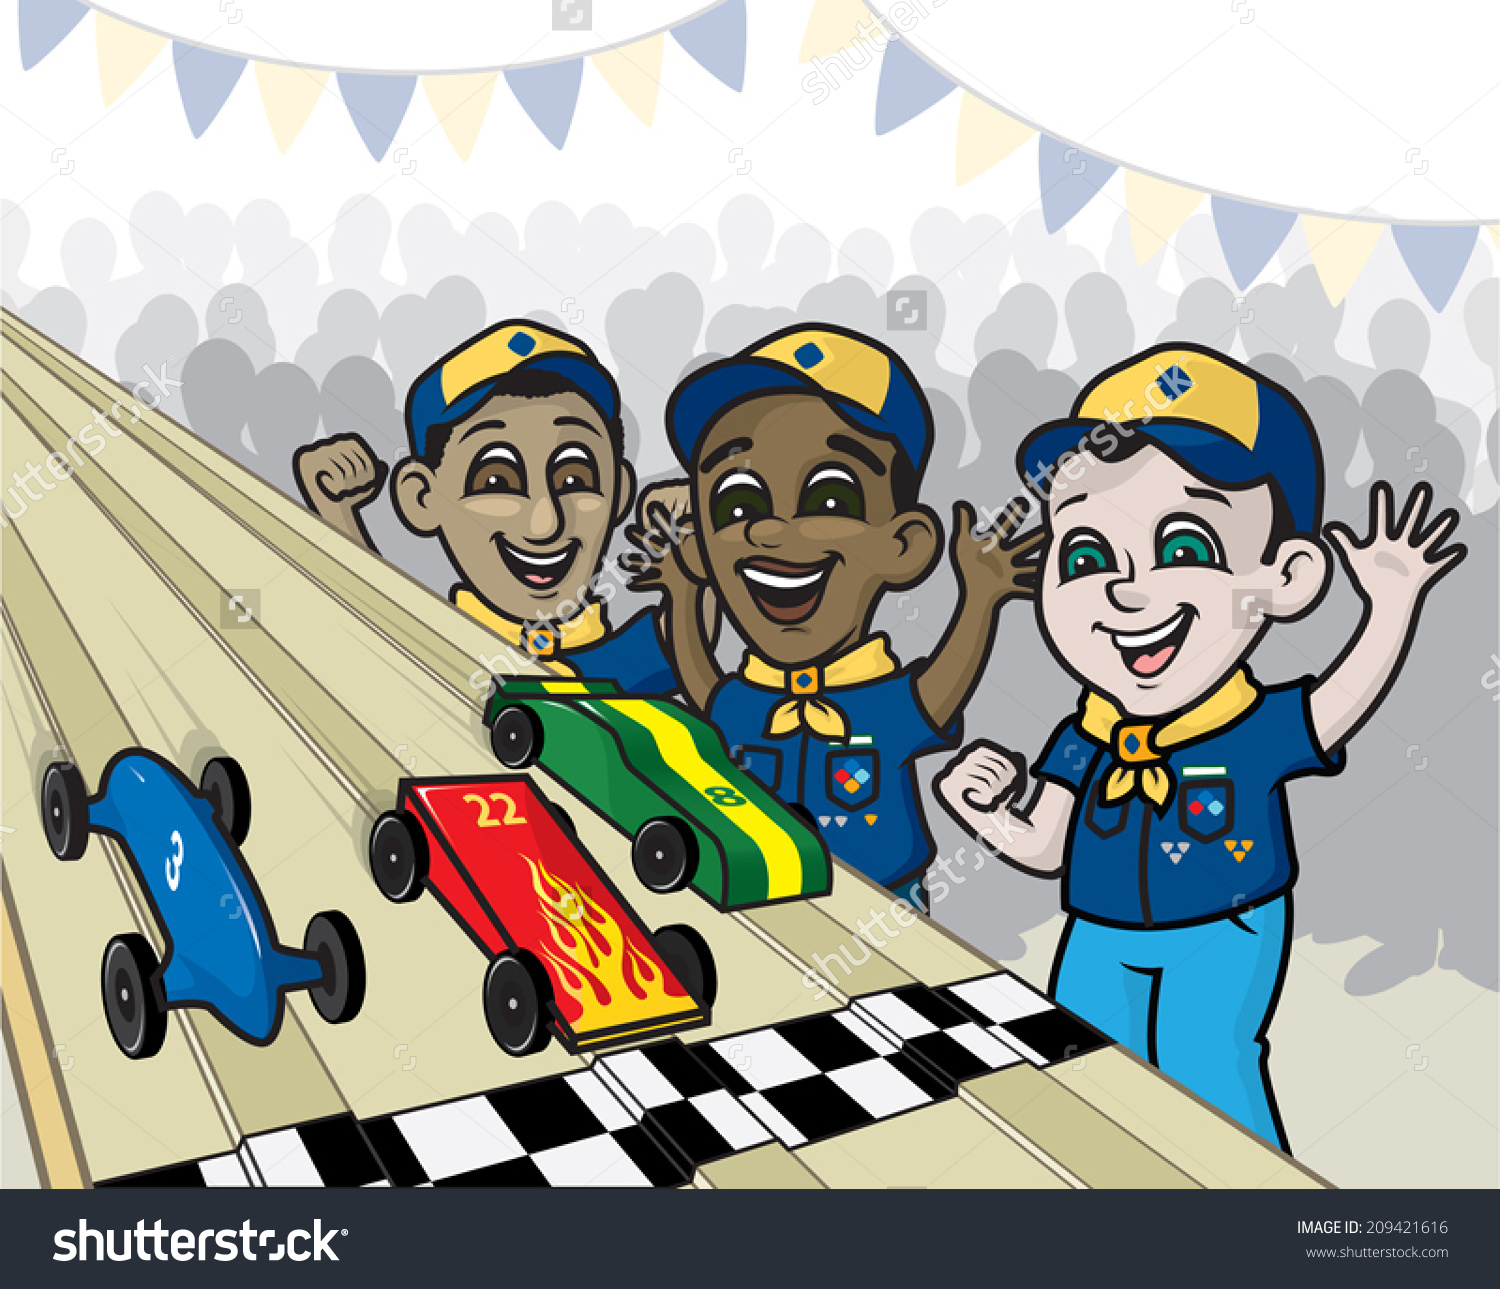 ... Pinewood Derby Clipart | 